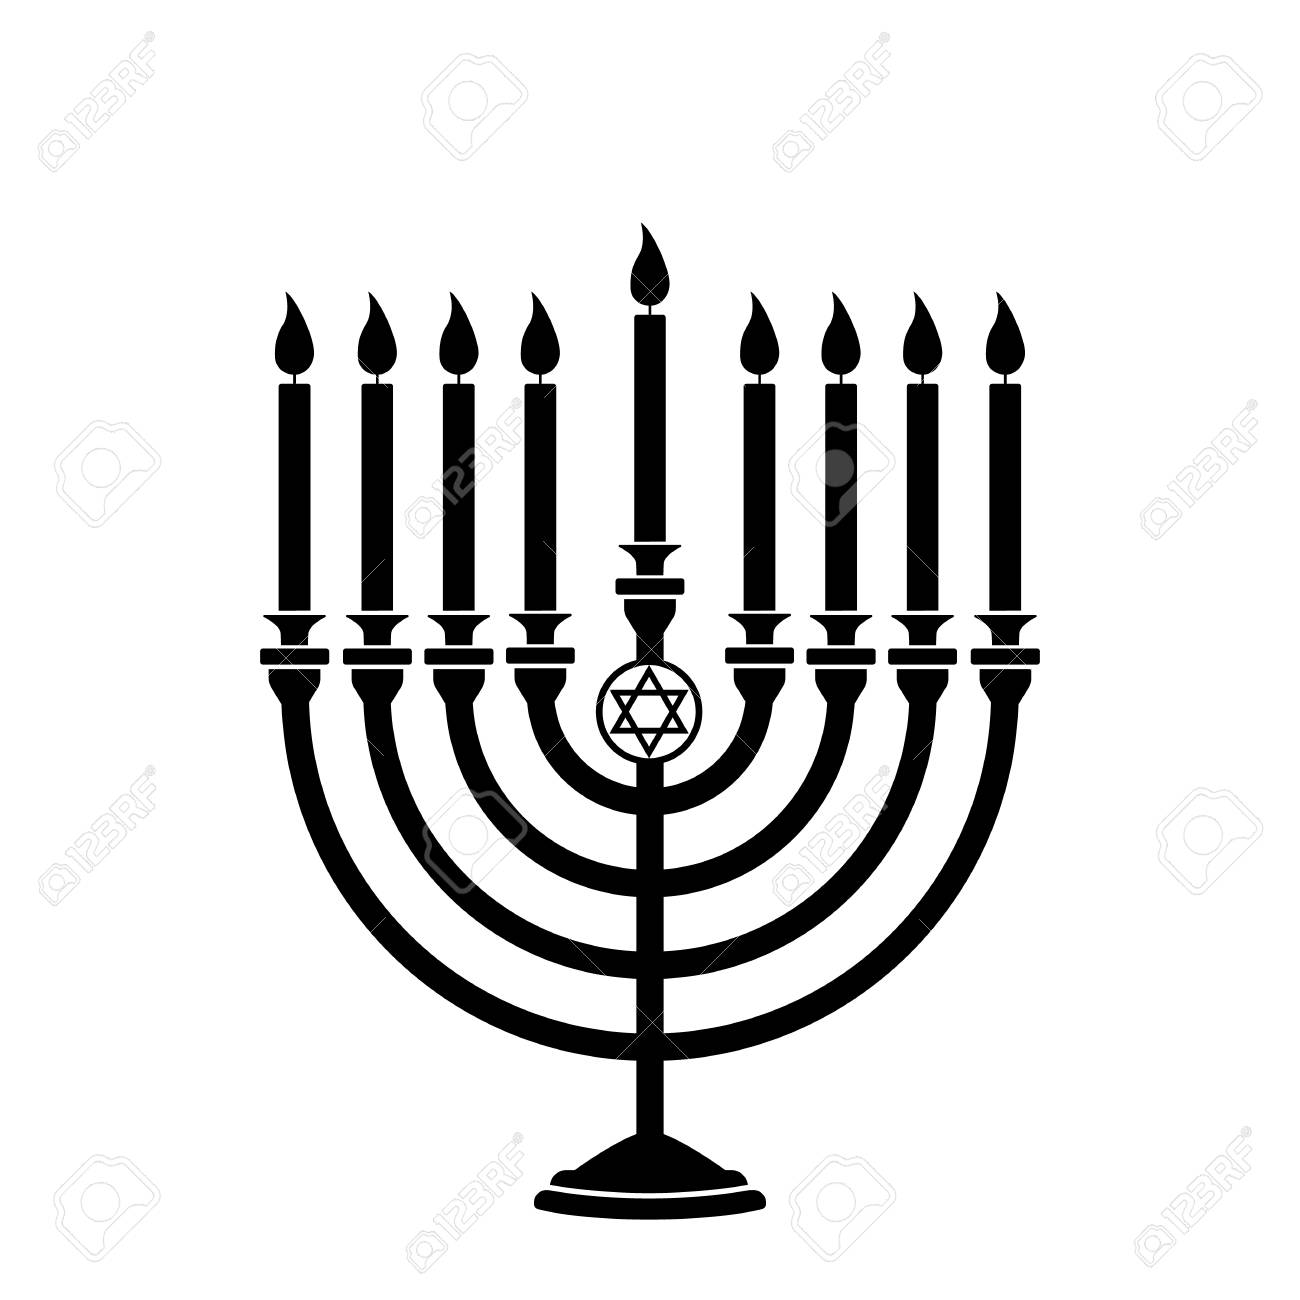 Hanukkah Menorah With Candles And Star Of David Isolated On